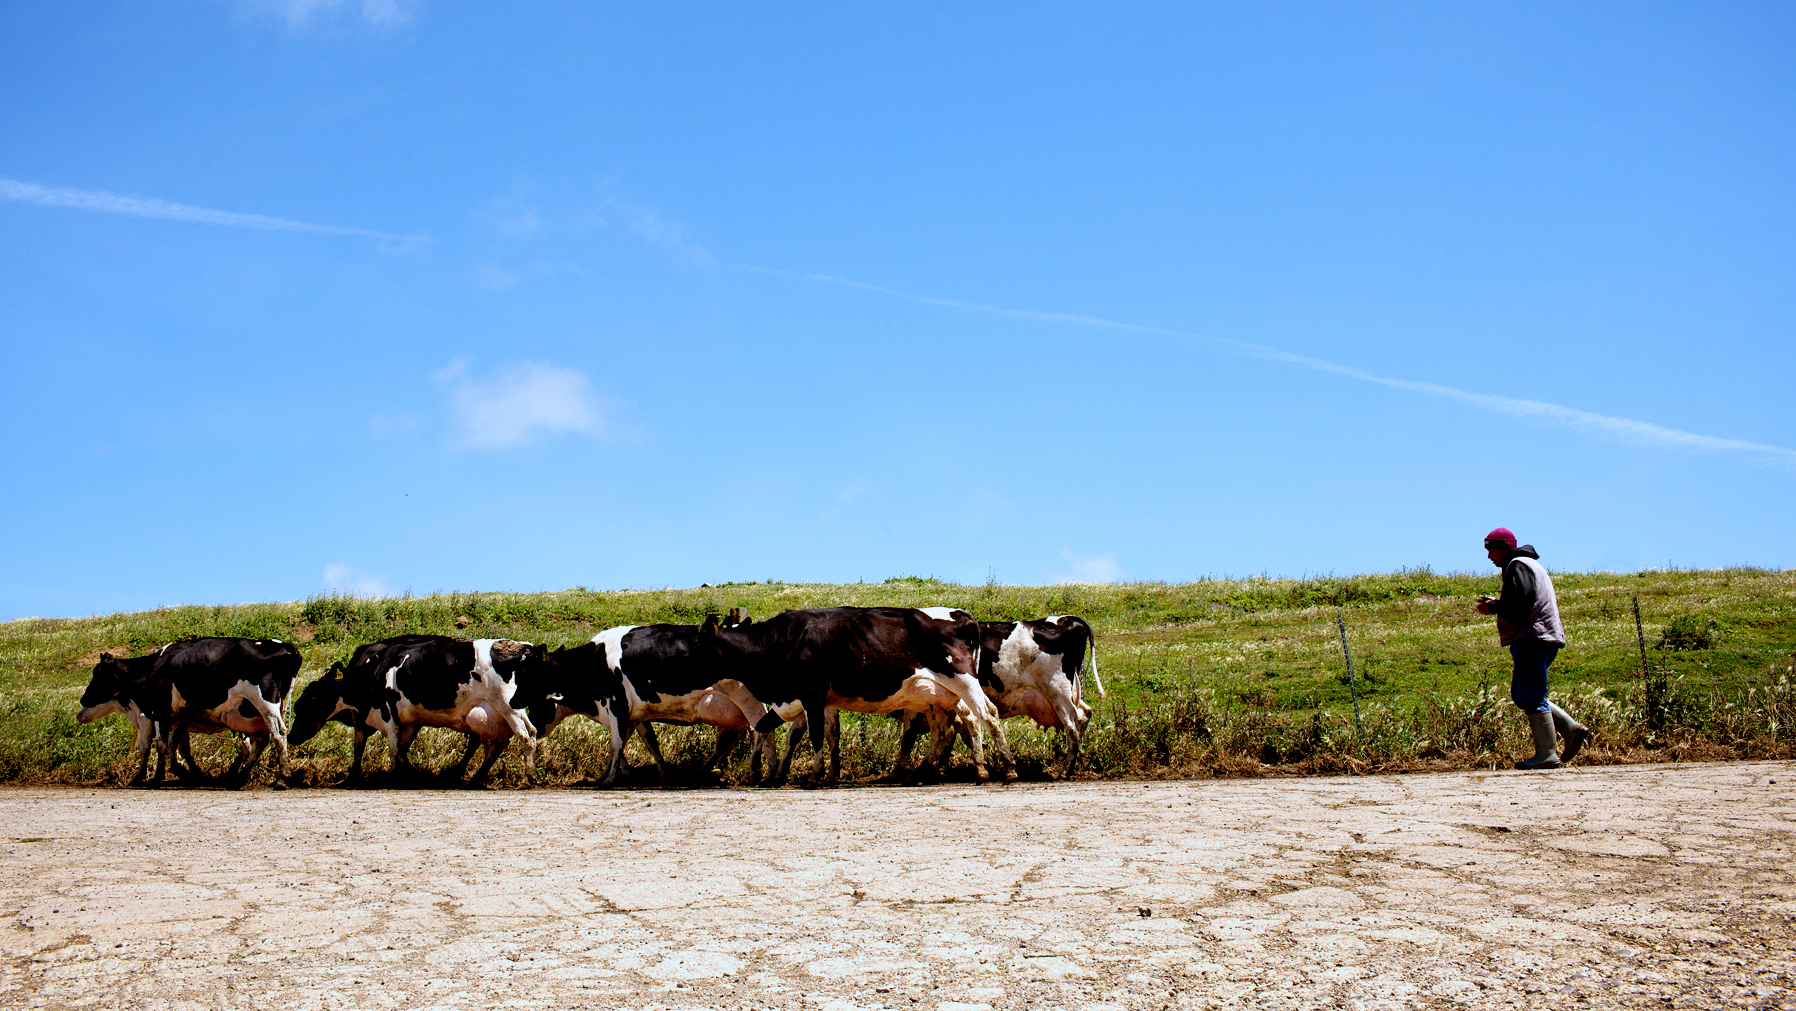 Jose Gonzalez monitors the cows at Bivalve Dairy as they walk to be milked at the farm near Point Reyes Station, Calif. Photo: Tim Hussin for NPR